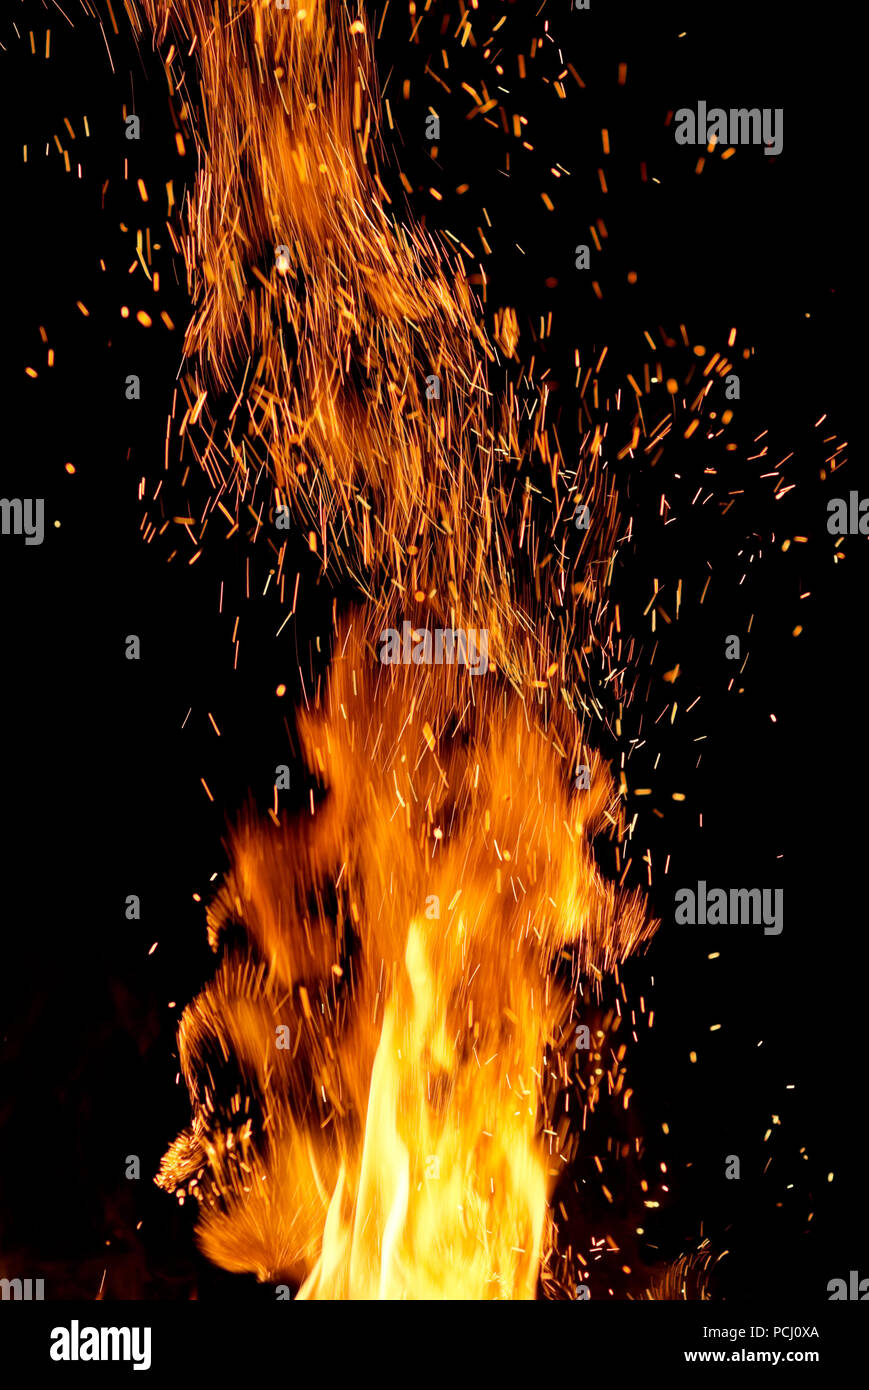 Fire flames with sparks on black background Stock Photo - Alamy